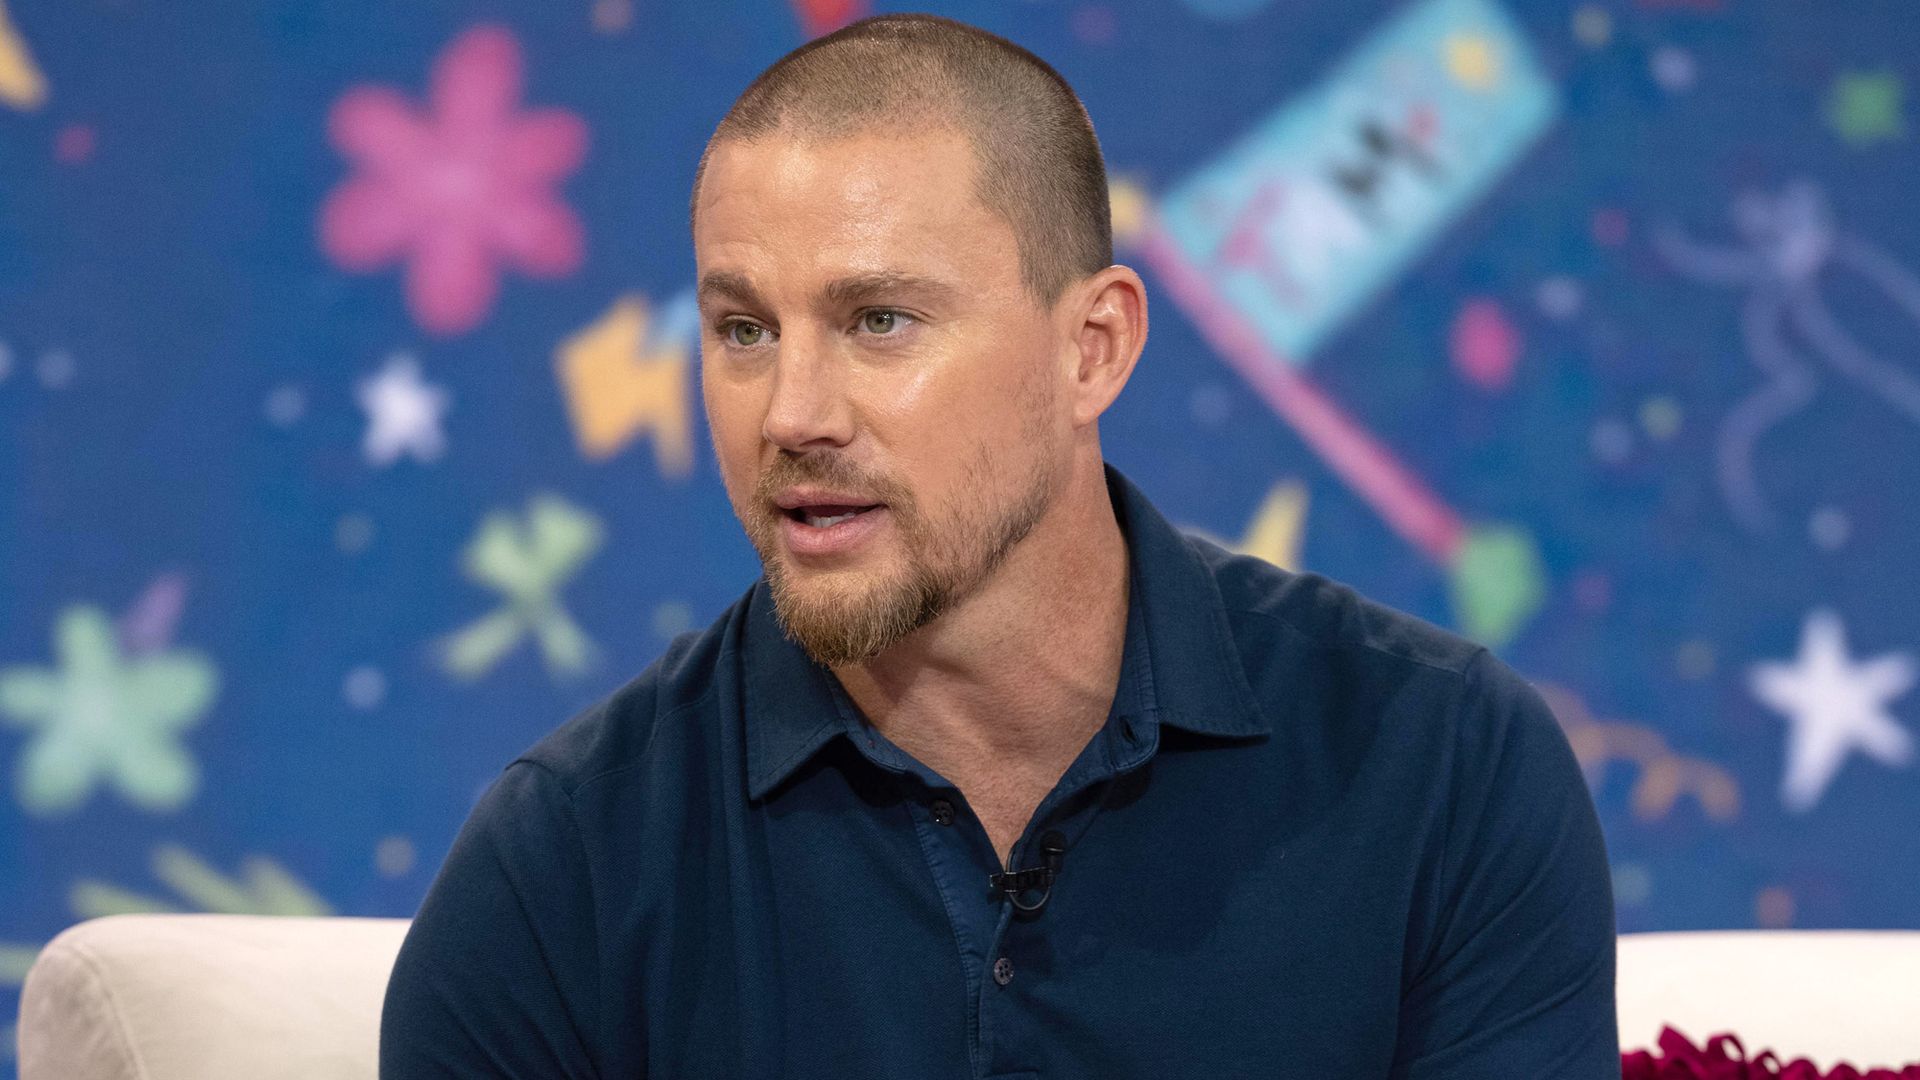 Channing Tatum on Today at talking and looking to the left